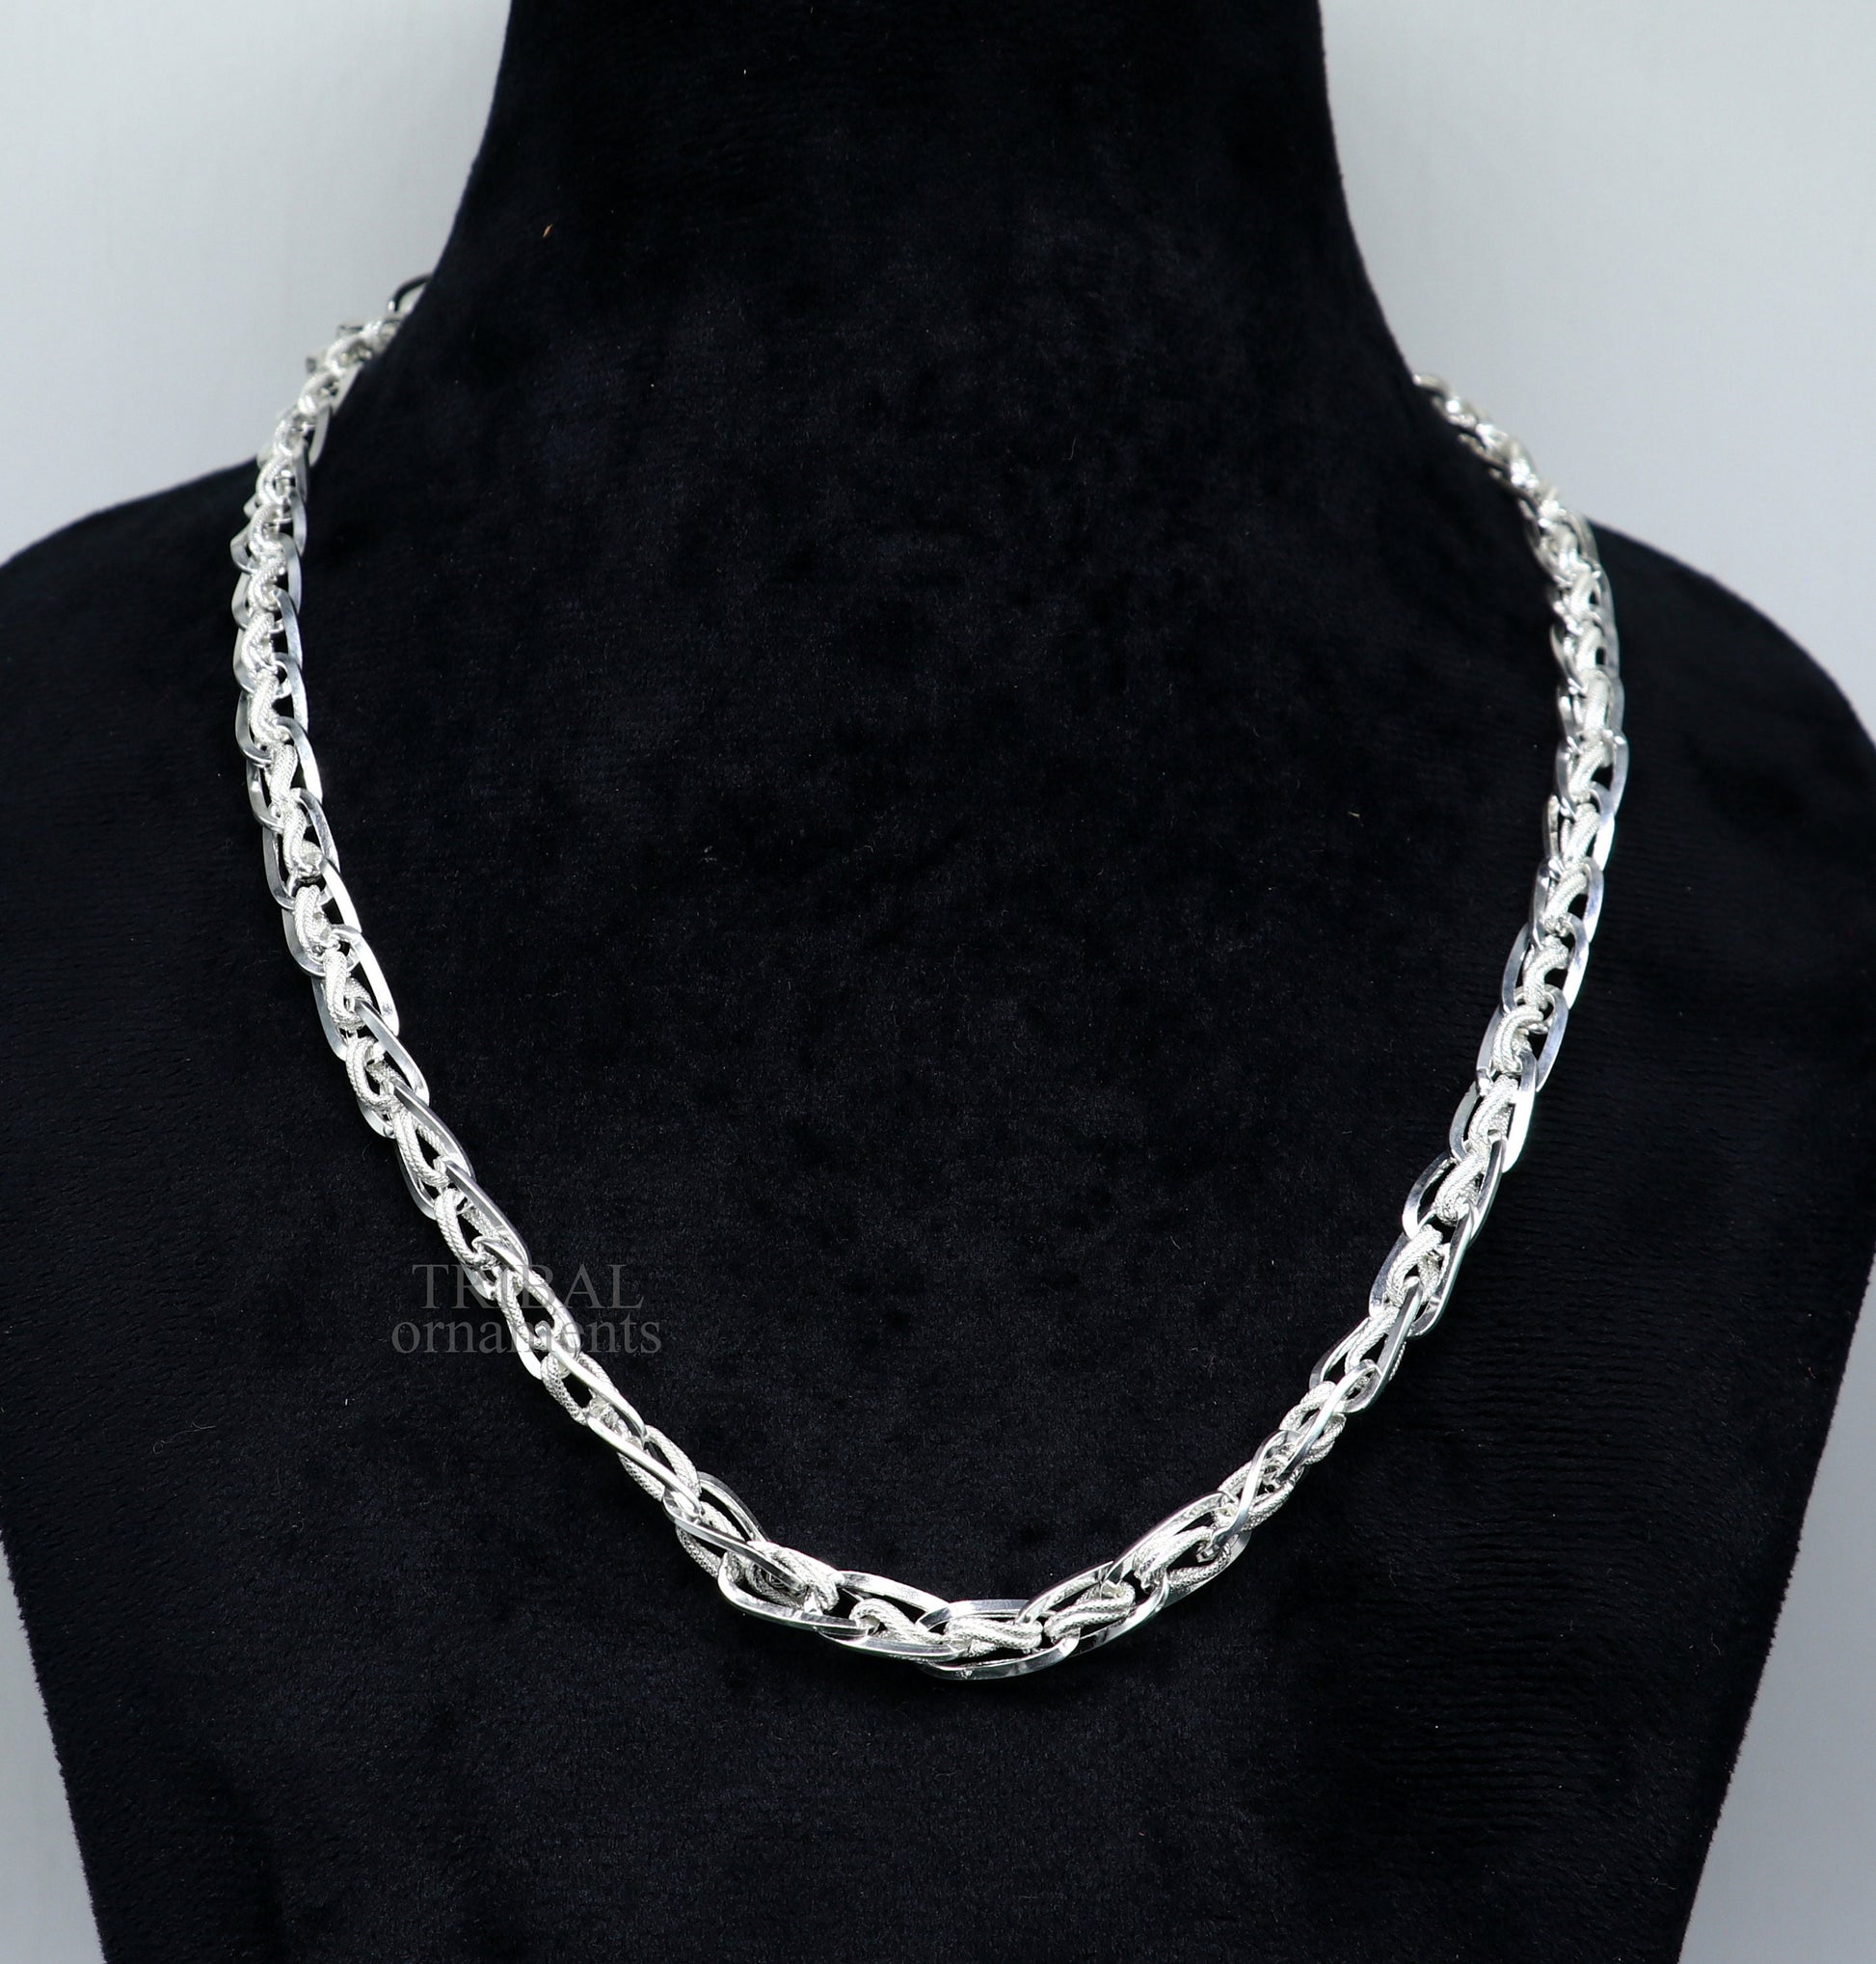 Exclusive unique stylish 21" 925 sterling silver 7mm handmade amazing chain necklace excellent gifting jewelry, men's chain necklace nch333 - TRIBAL ORNAMENTS